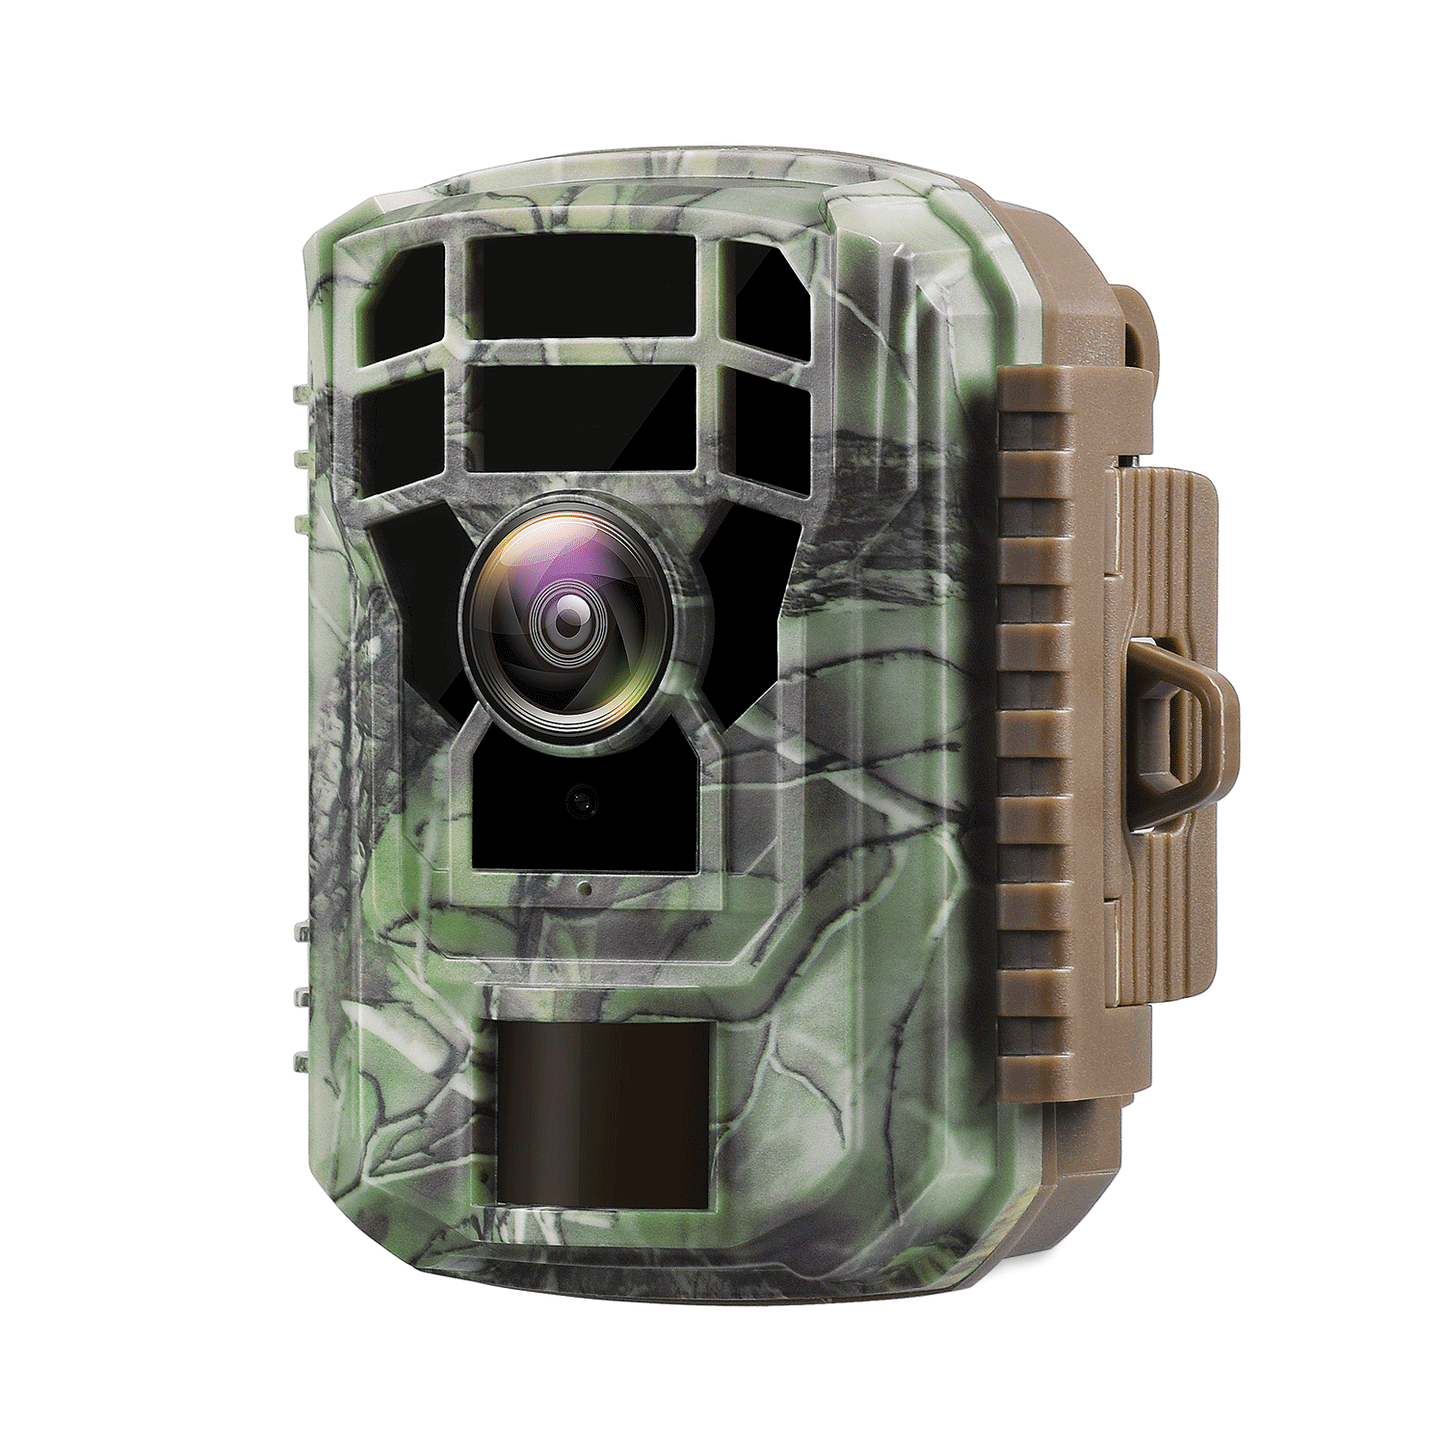 CAMPARK T20 Mini Trail Camera 16MP 1080P HD Hunting Deer Game Camera with Night Vision Waterproof 120°Wide-Angle 2.0" LCD Trail Wildlife Cam